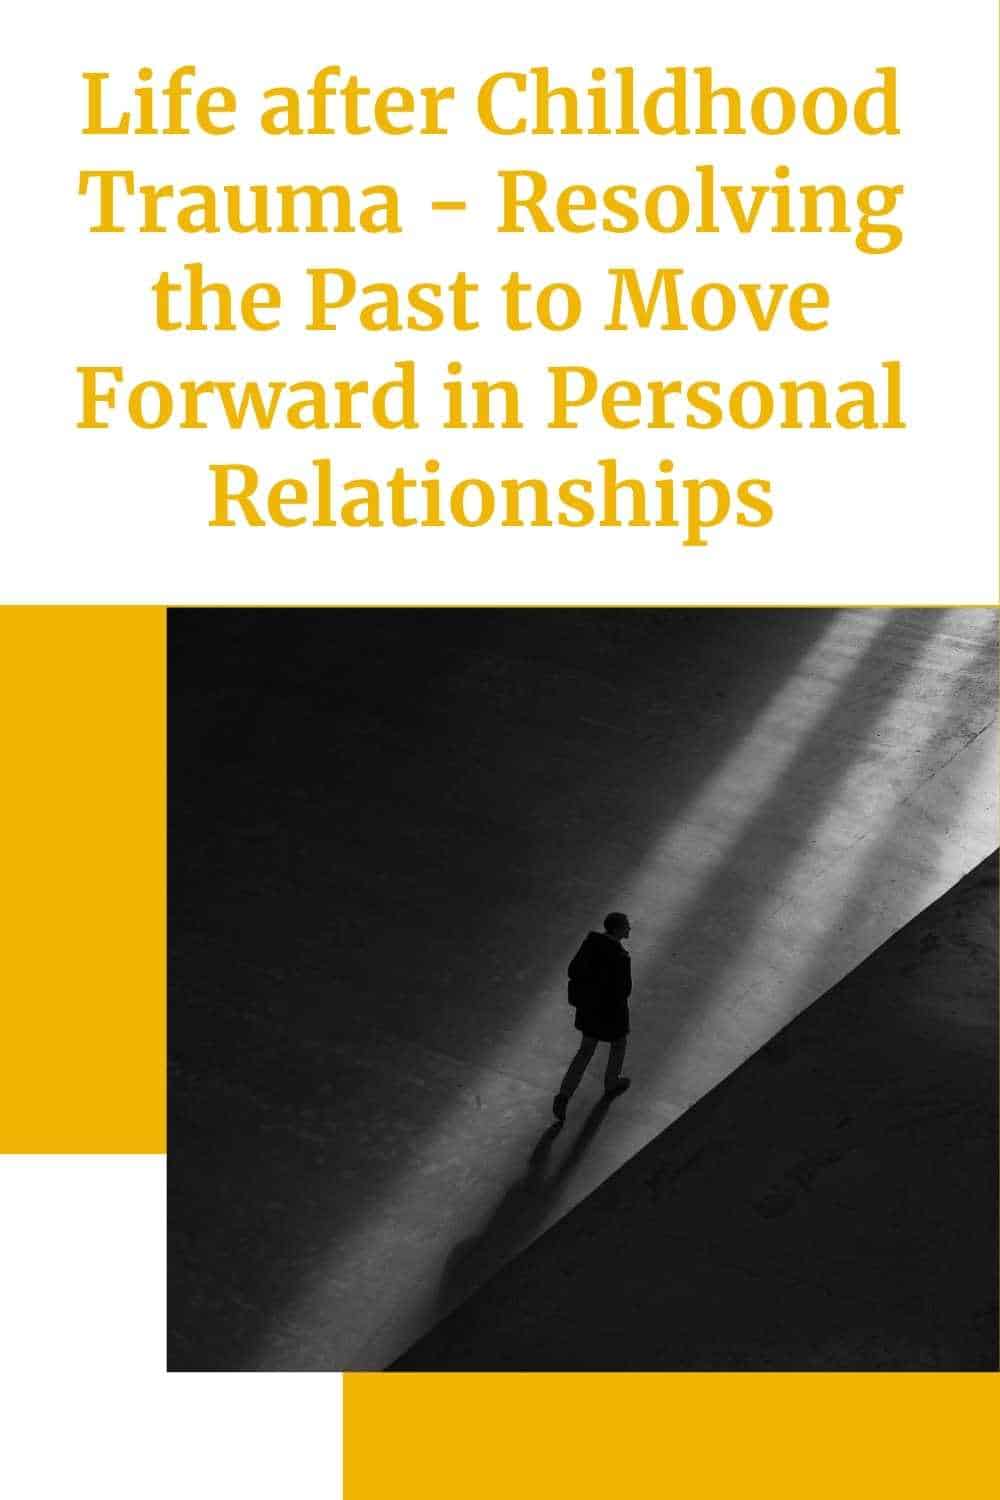 Life after Childhood Trauma – Resolving the Past to Move Forward in Personal Relationships